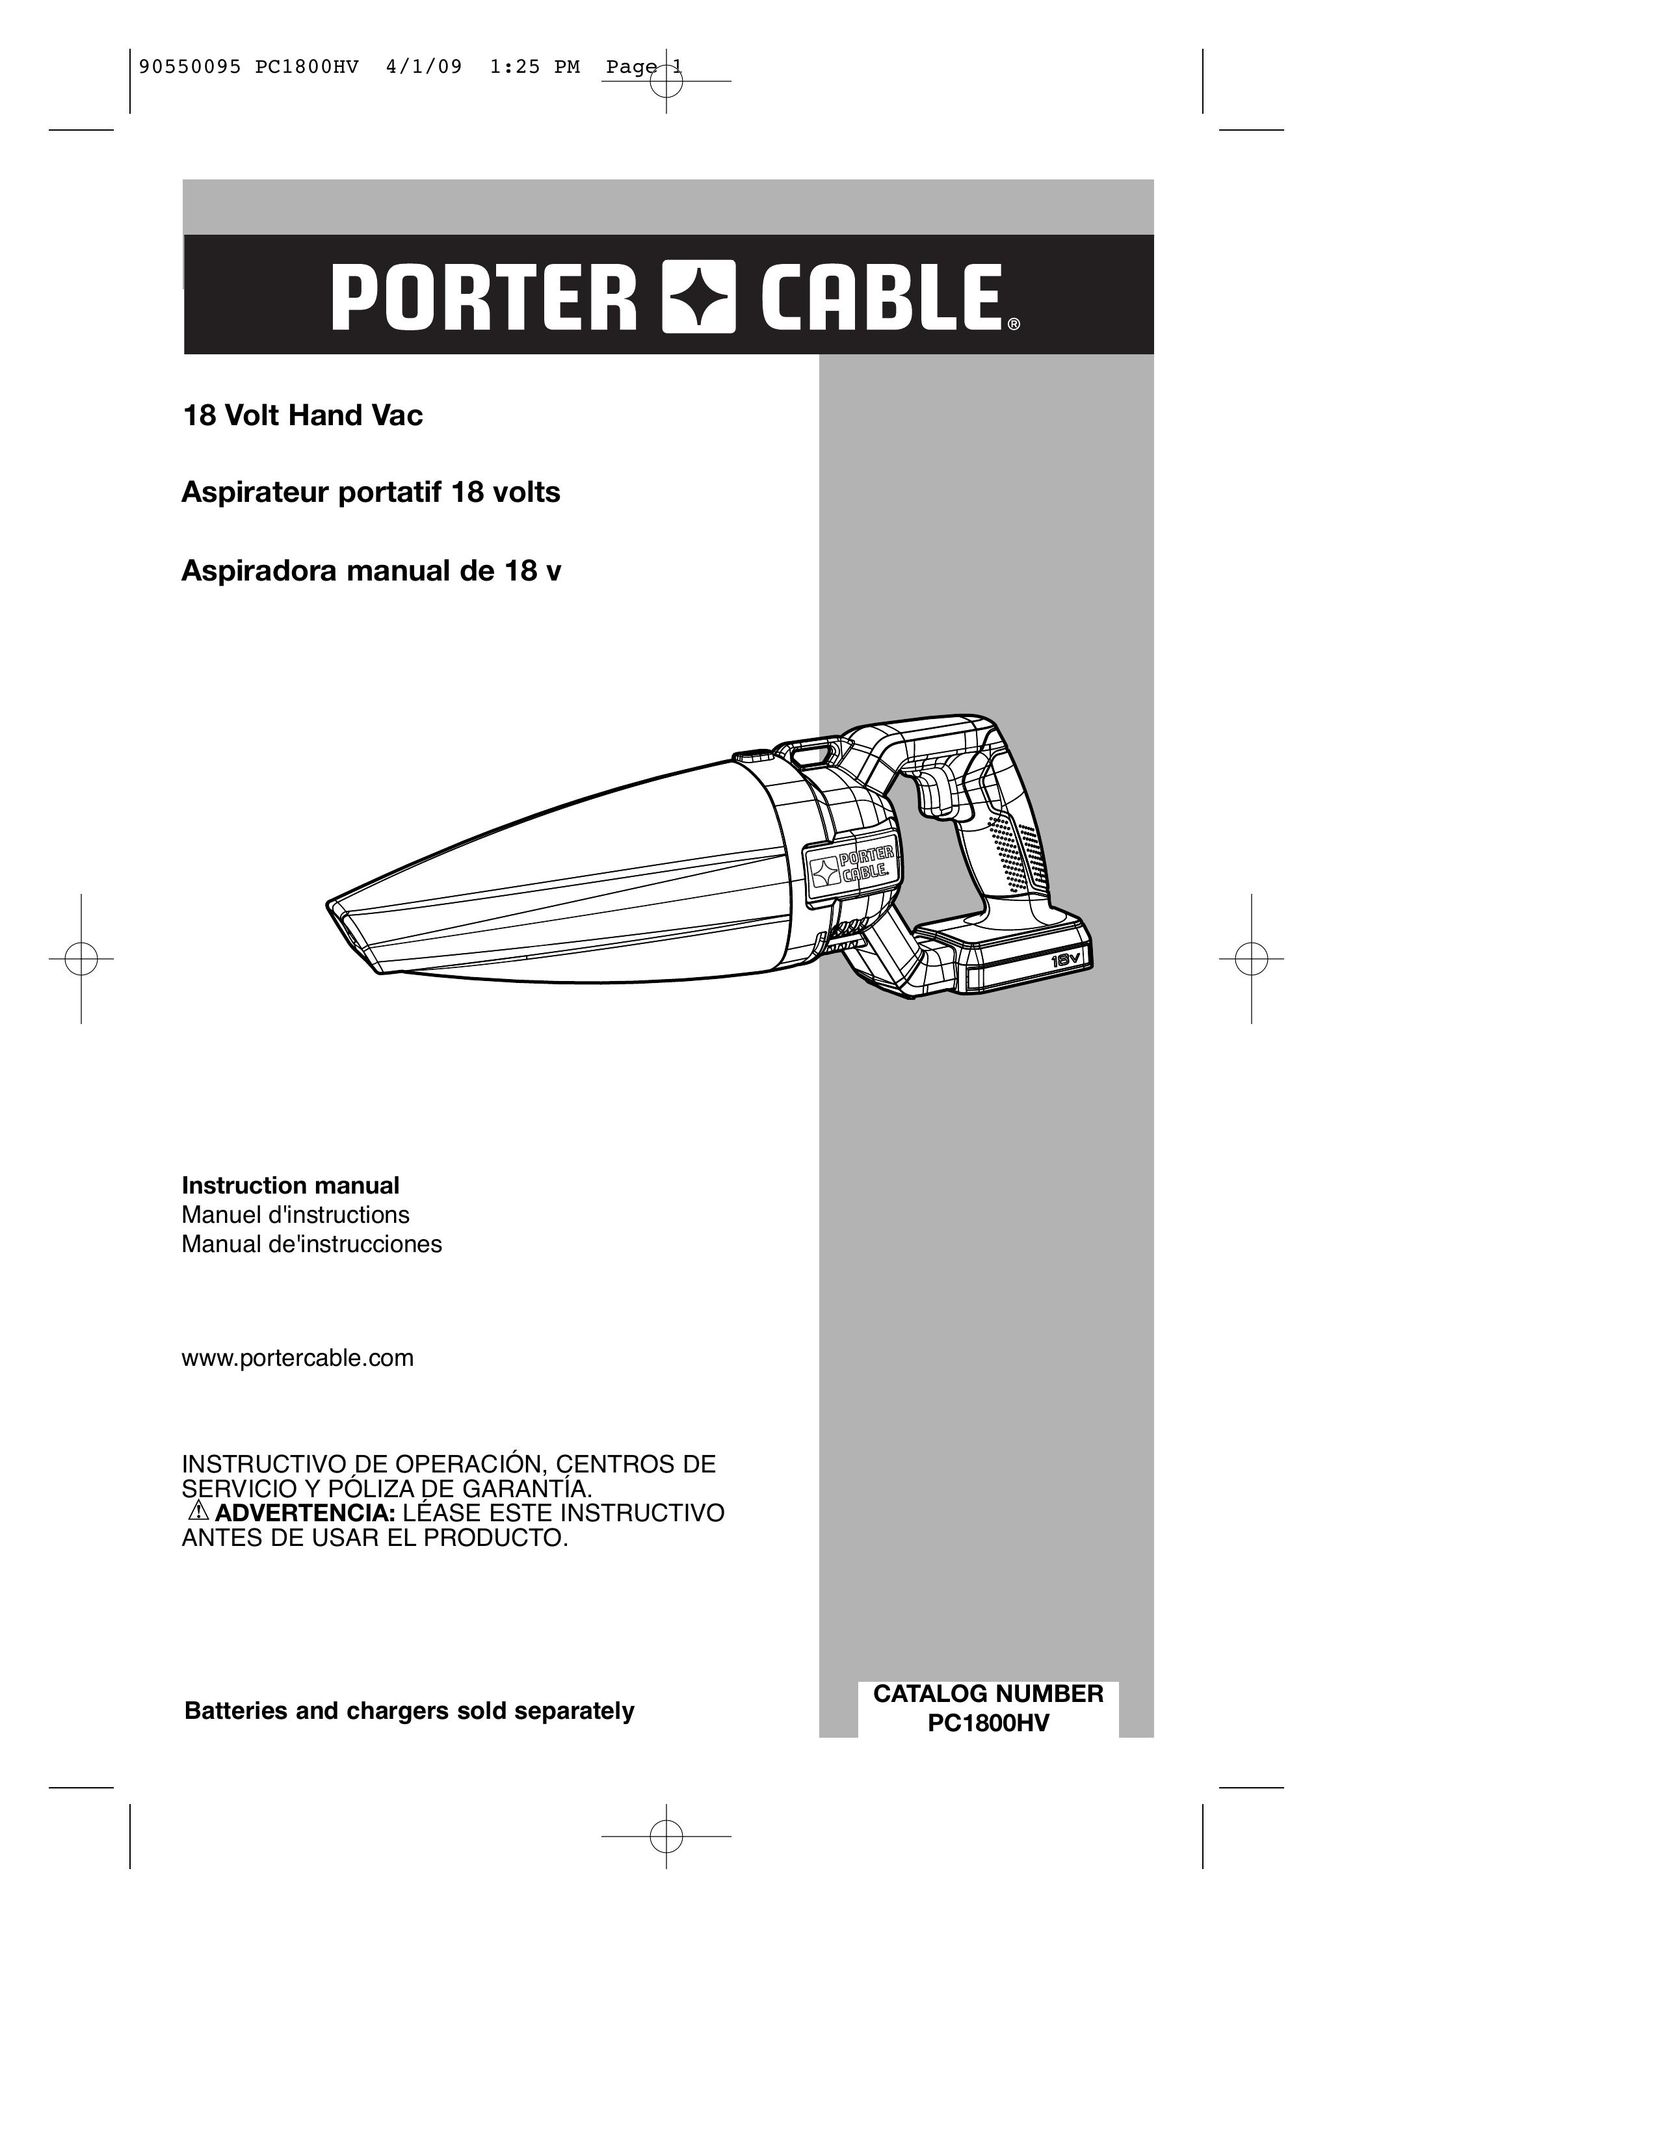 Porter-Cable 90550095 Vacuum Cleaner User Manual